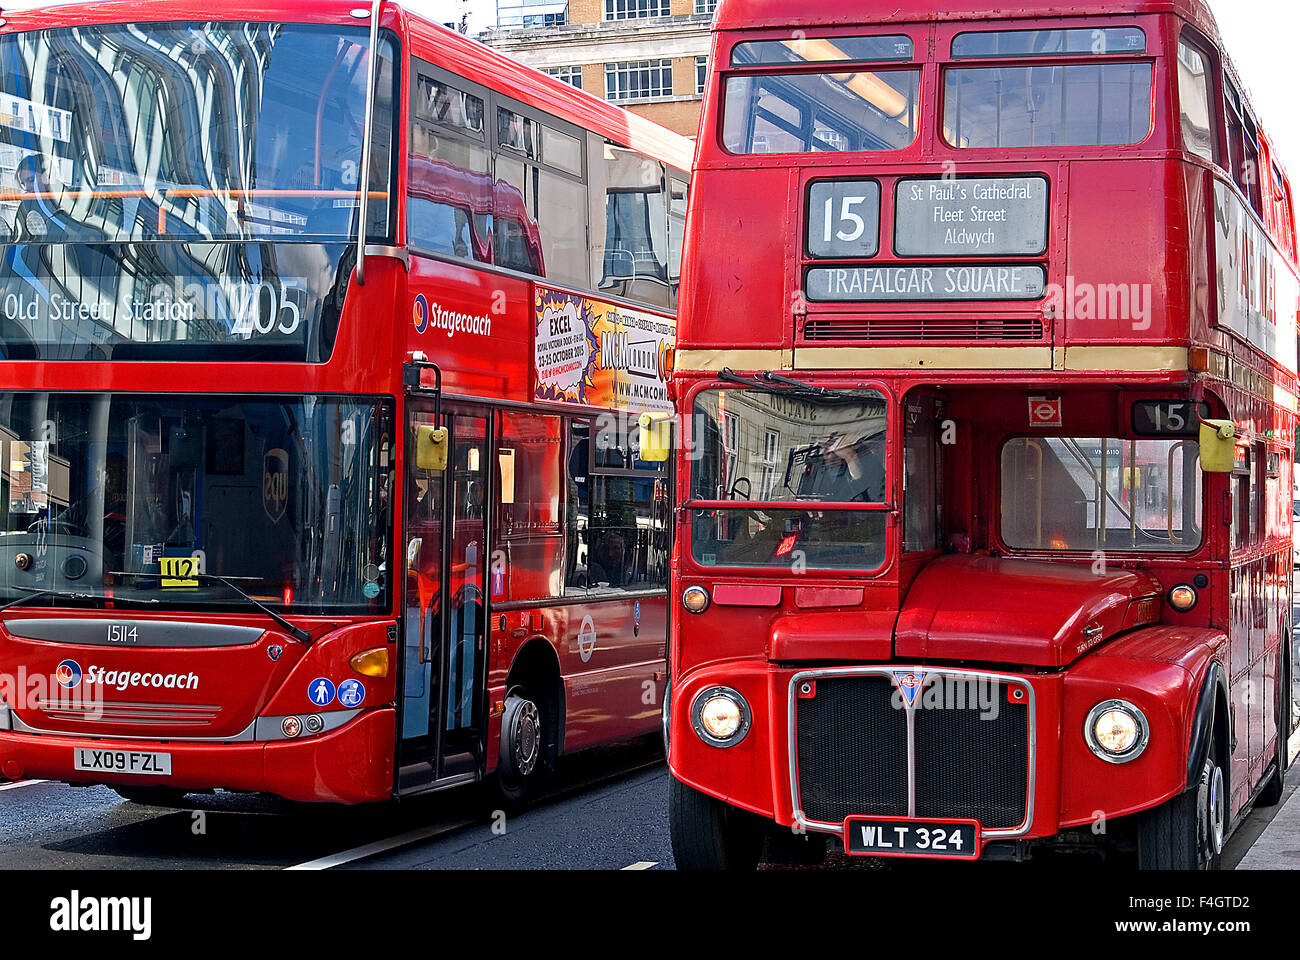 Two red double decker London buses side by side in a street in Whitechapel, East London. Routemaster buses still operate as heritage transport. Stock Photo